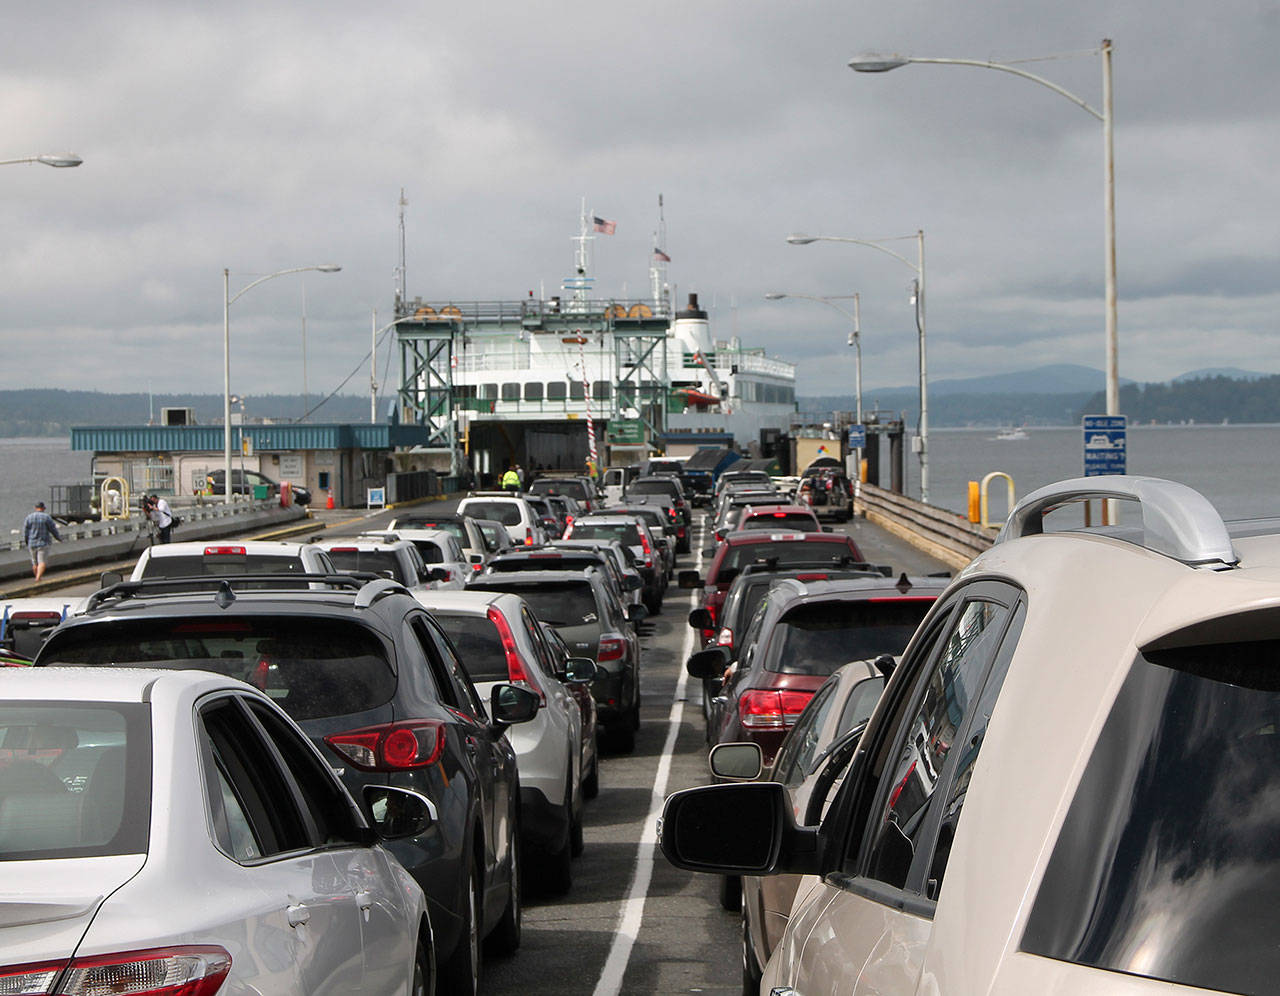 The Fauntleroy dock, which serves the triangle route, has long been a source of frustration for commuters. Members of a task force created to deal with the issues plaguing the route are now turning their attention away from the dock and to the schedule. (Susan Riemer/Staff Photo)